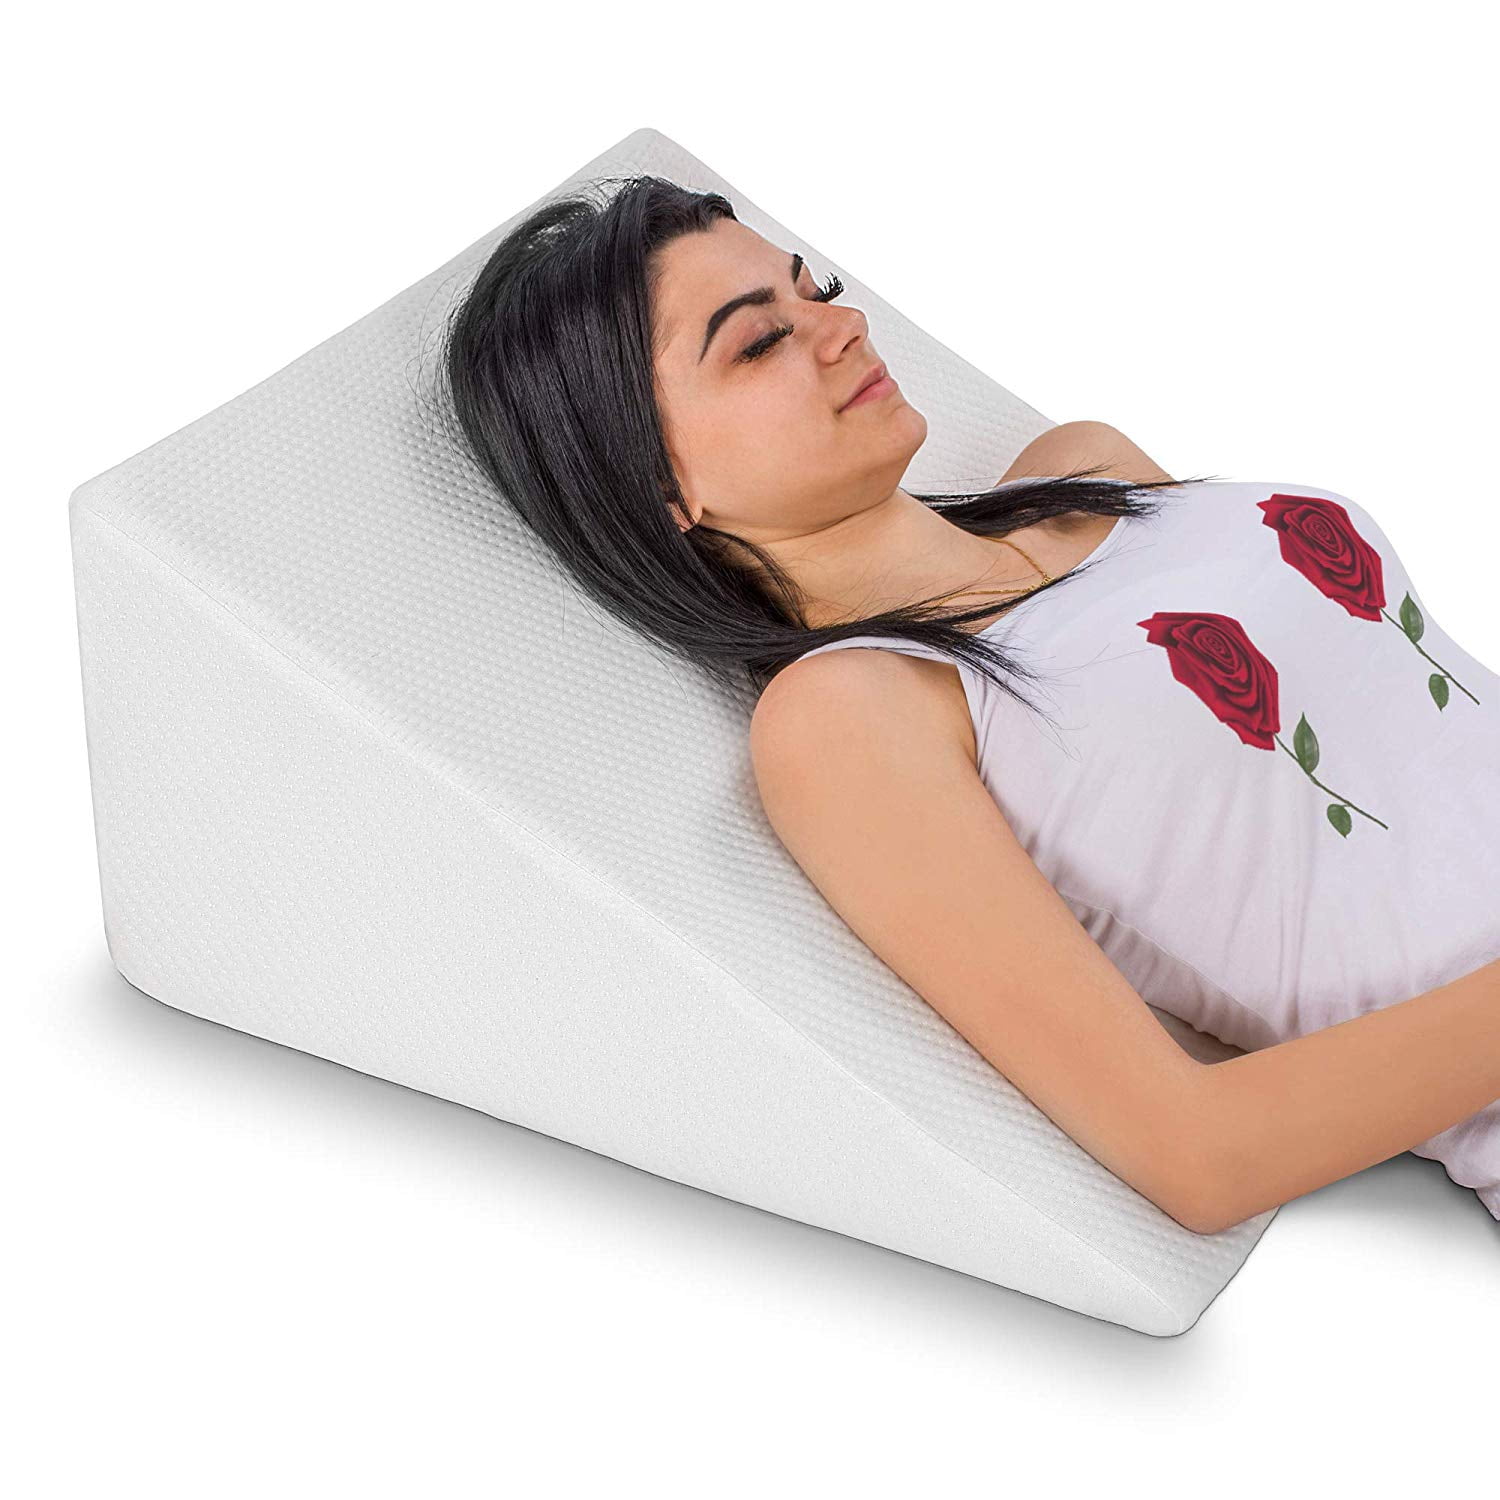 Elevating Wedge Bed Pillow Best Support Pillow Premium Therapeutic Pillow 